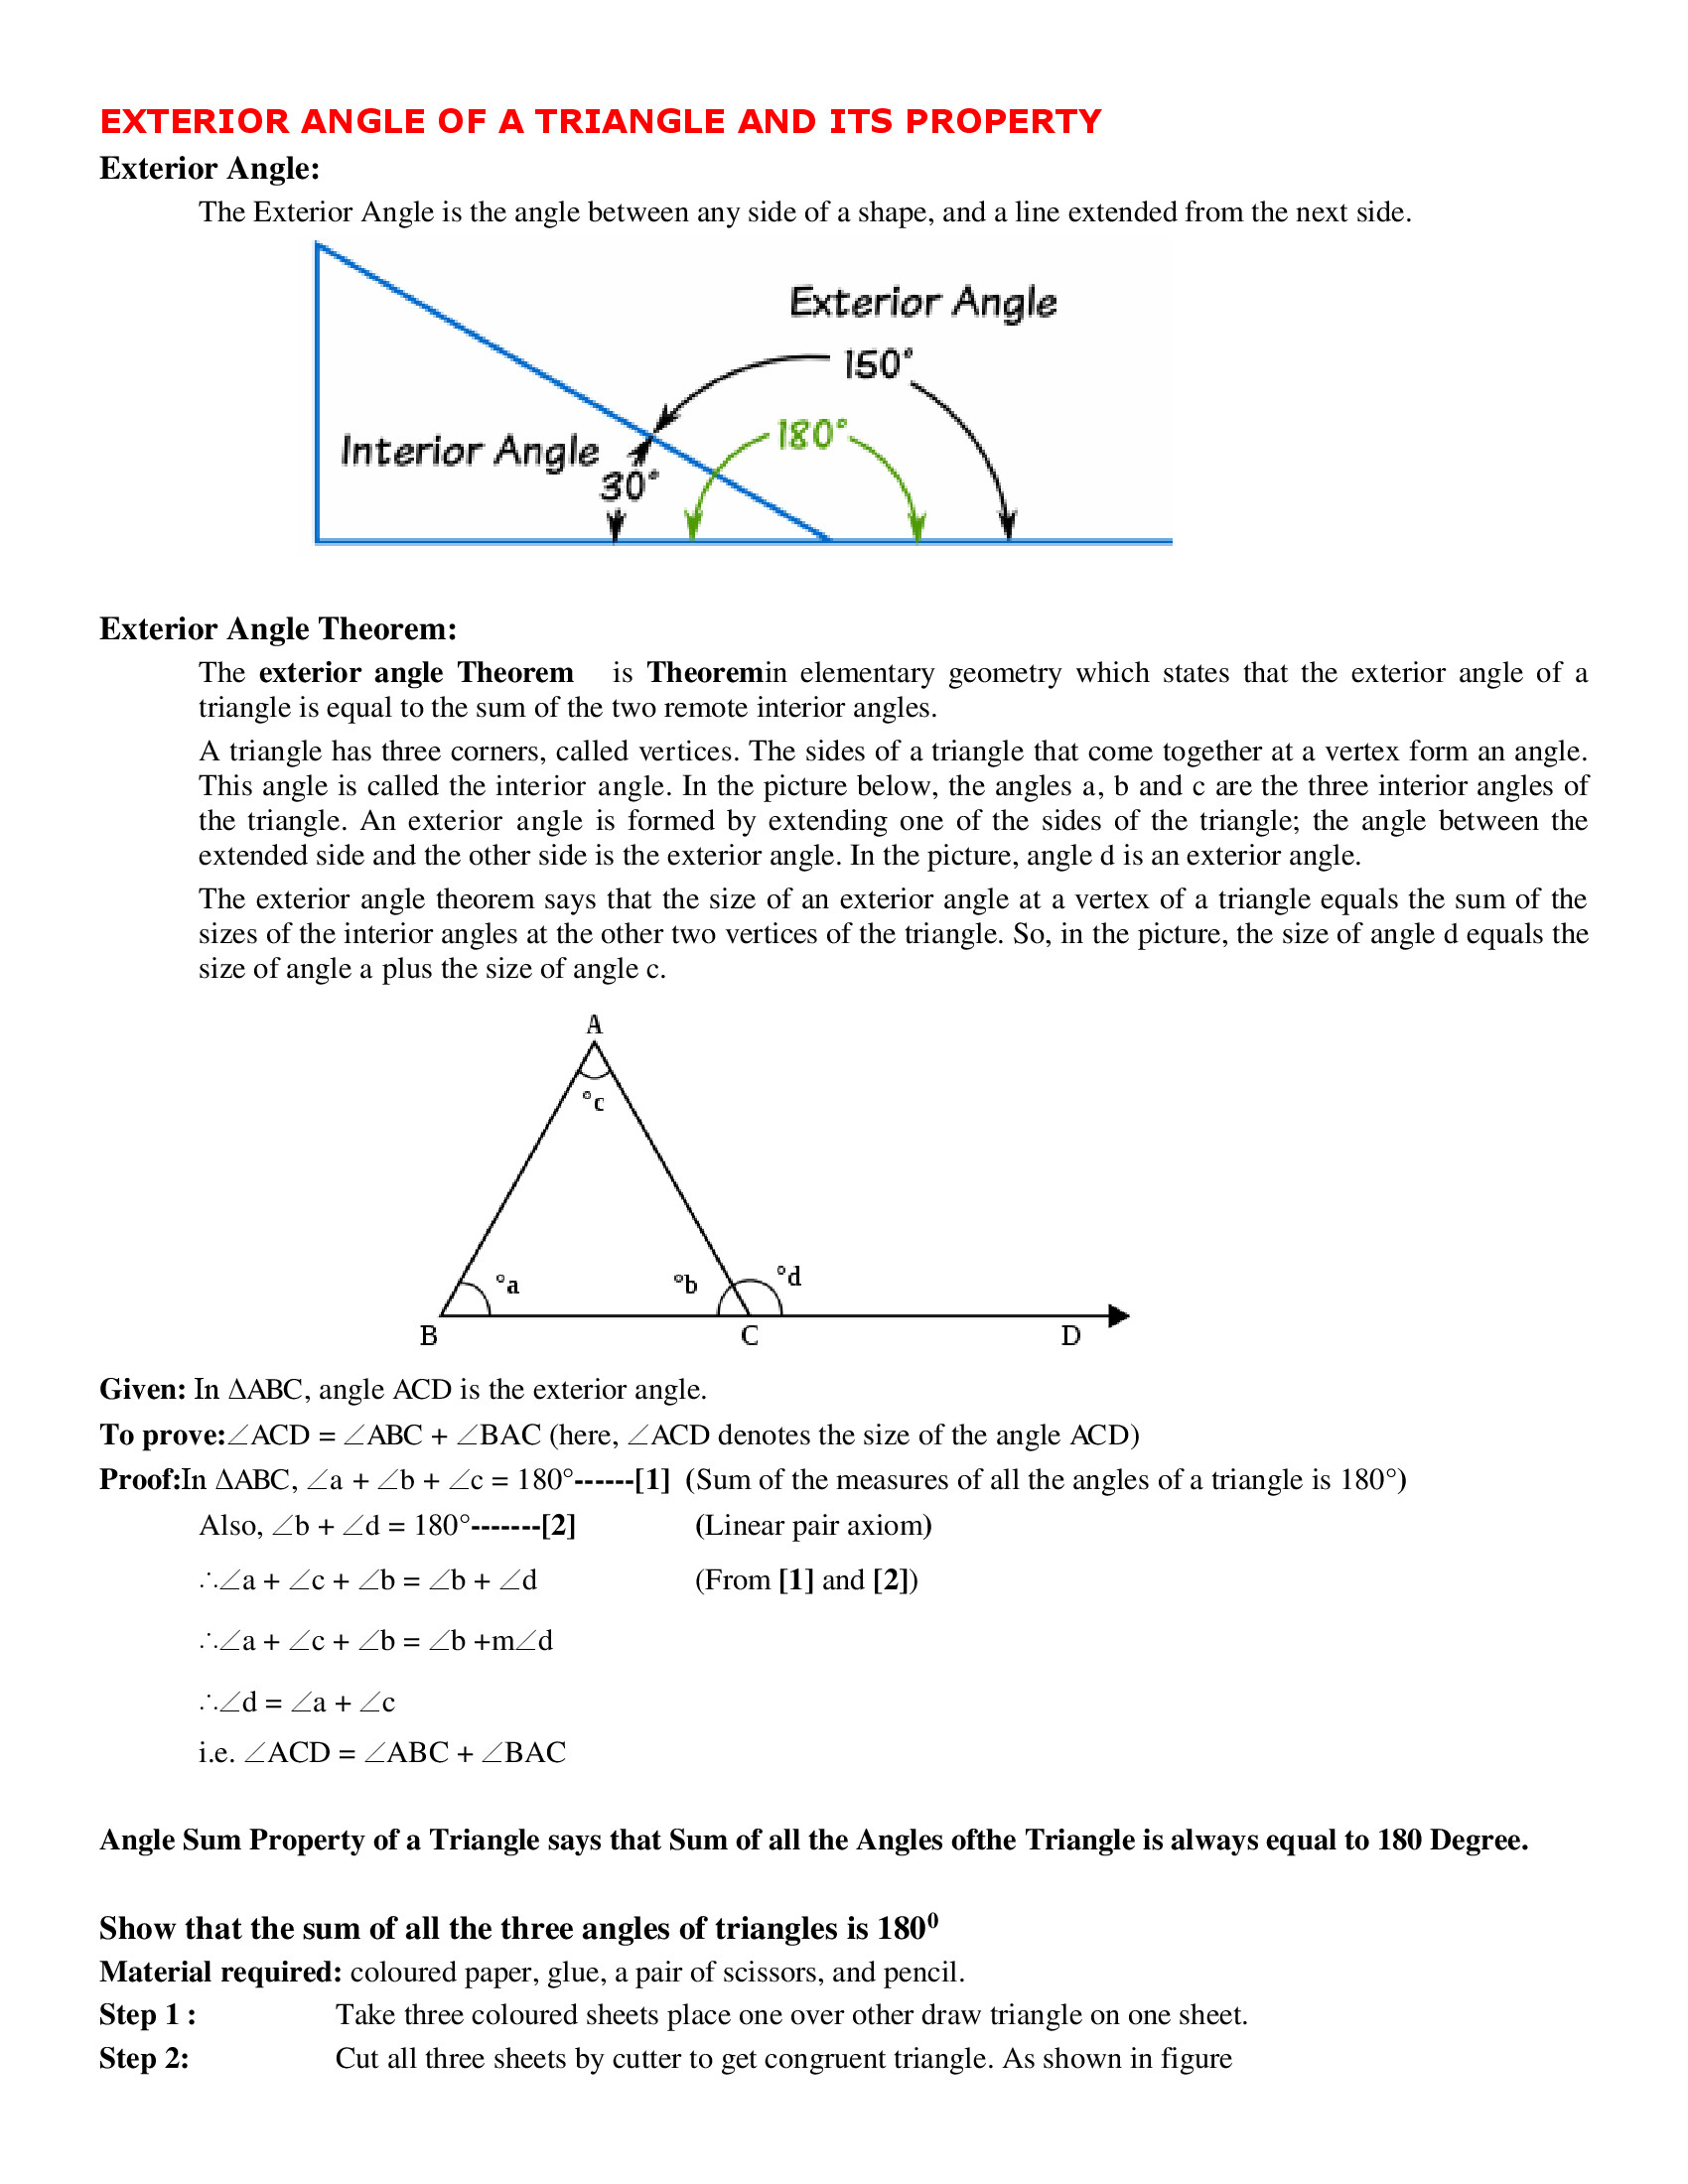 Triangle Angle Sum Worksheet Answers Exterior Angle Of A Triangle and Its Property Worksheet